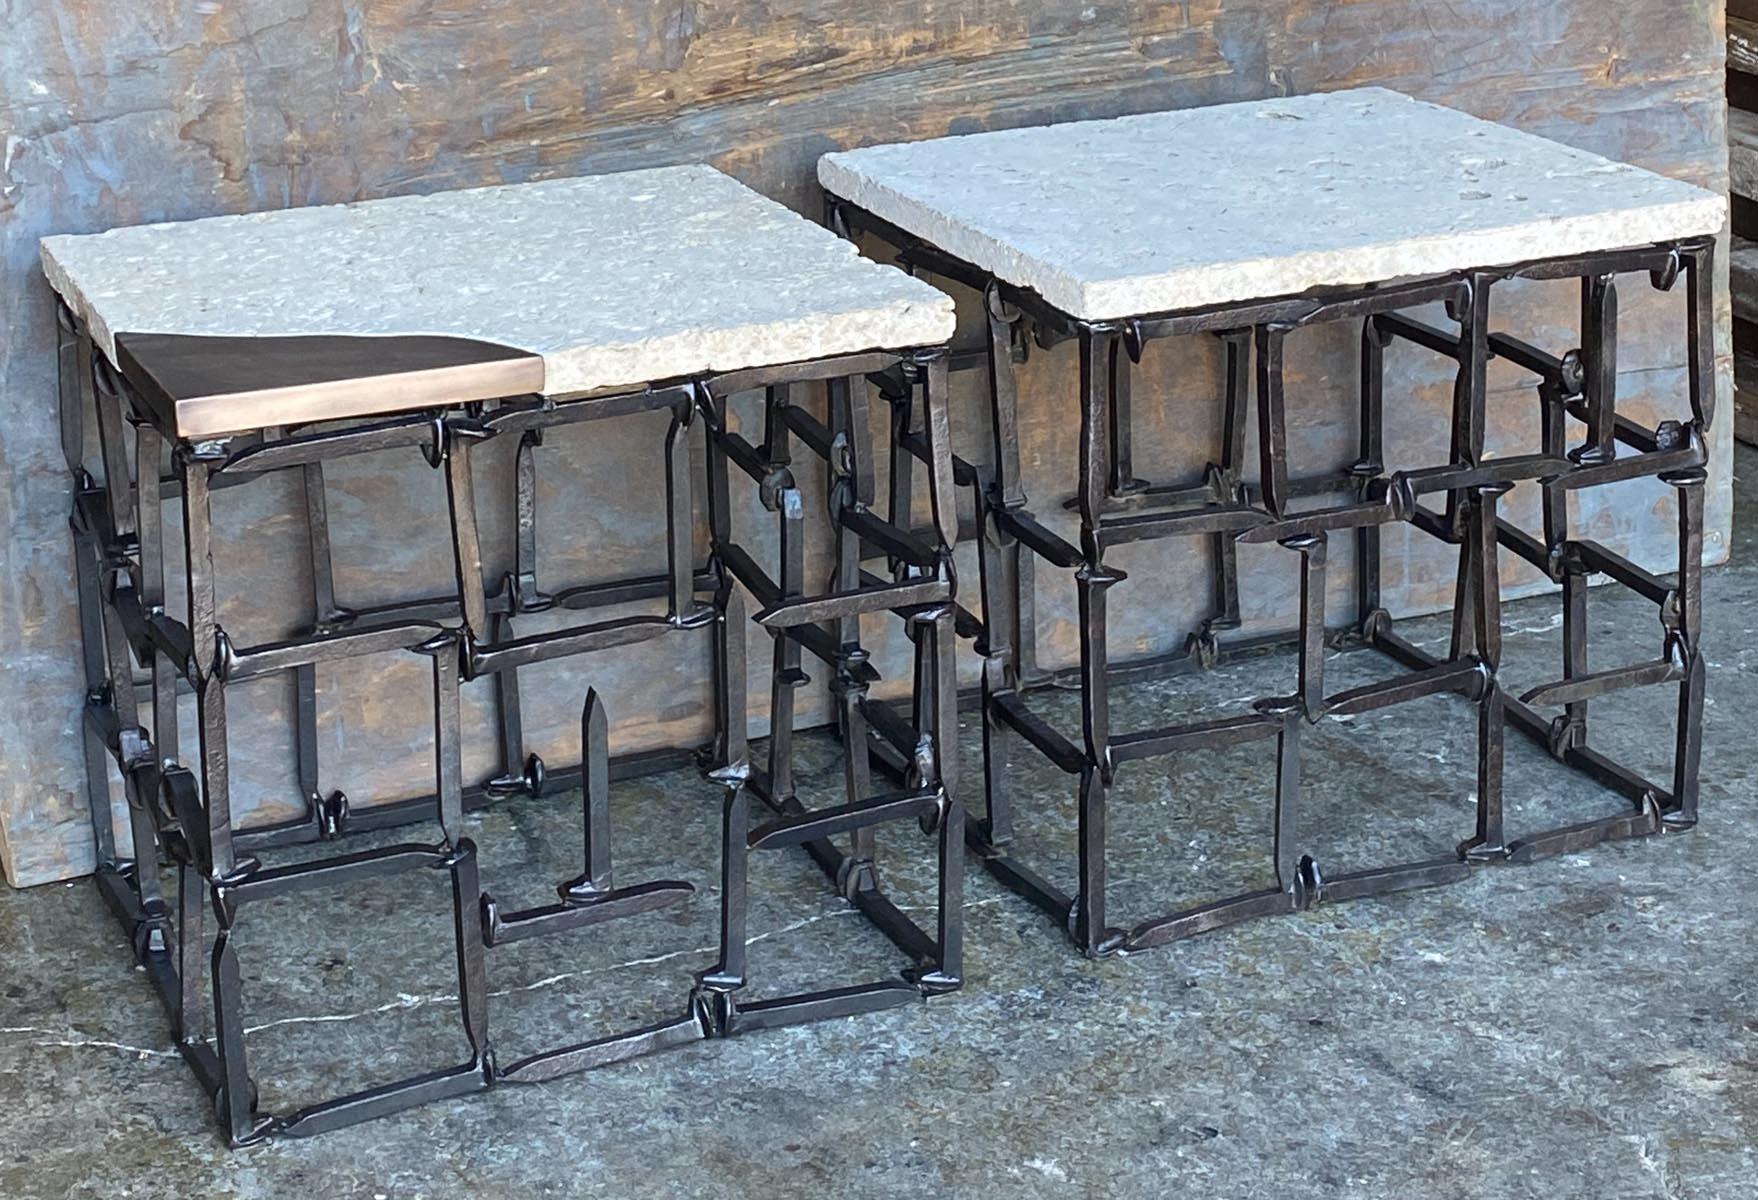 This pair of tables are made from vintage railroad spikes with Texas shell limestone tops. One table has a bronze inlay corner. The Texas shell limestone is a soft, porous white stone with visible fossils and shells, very interesting!
This is a